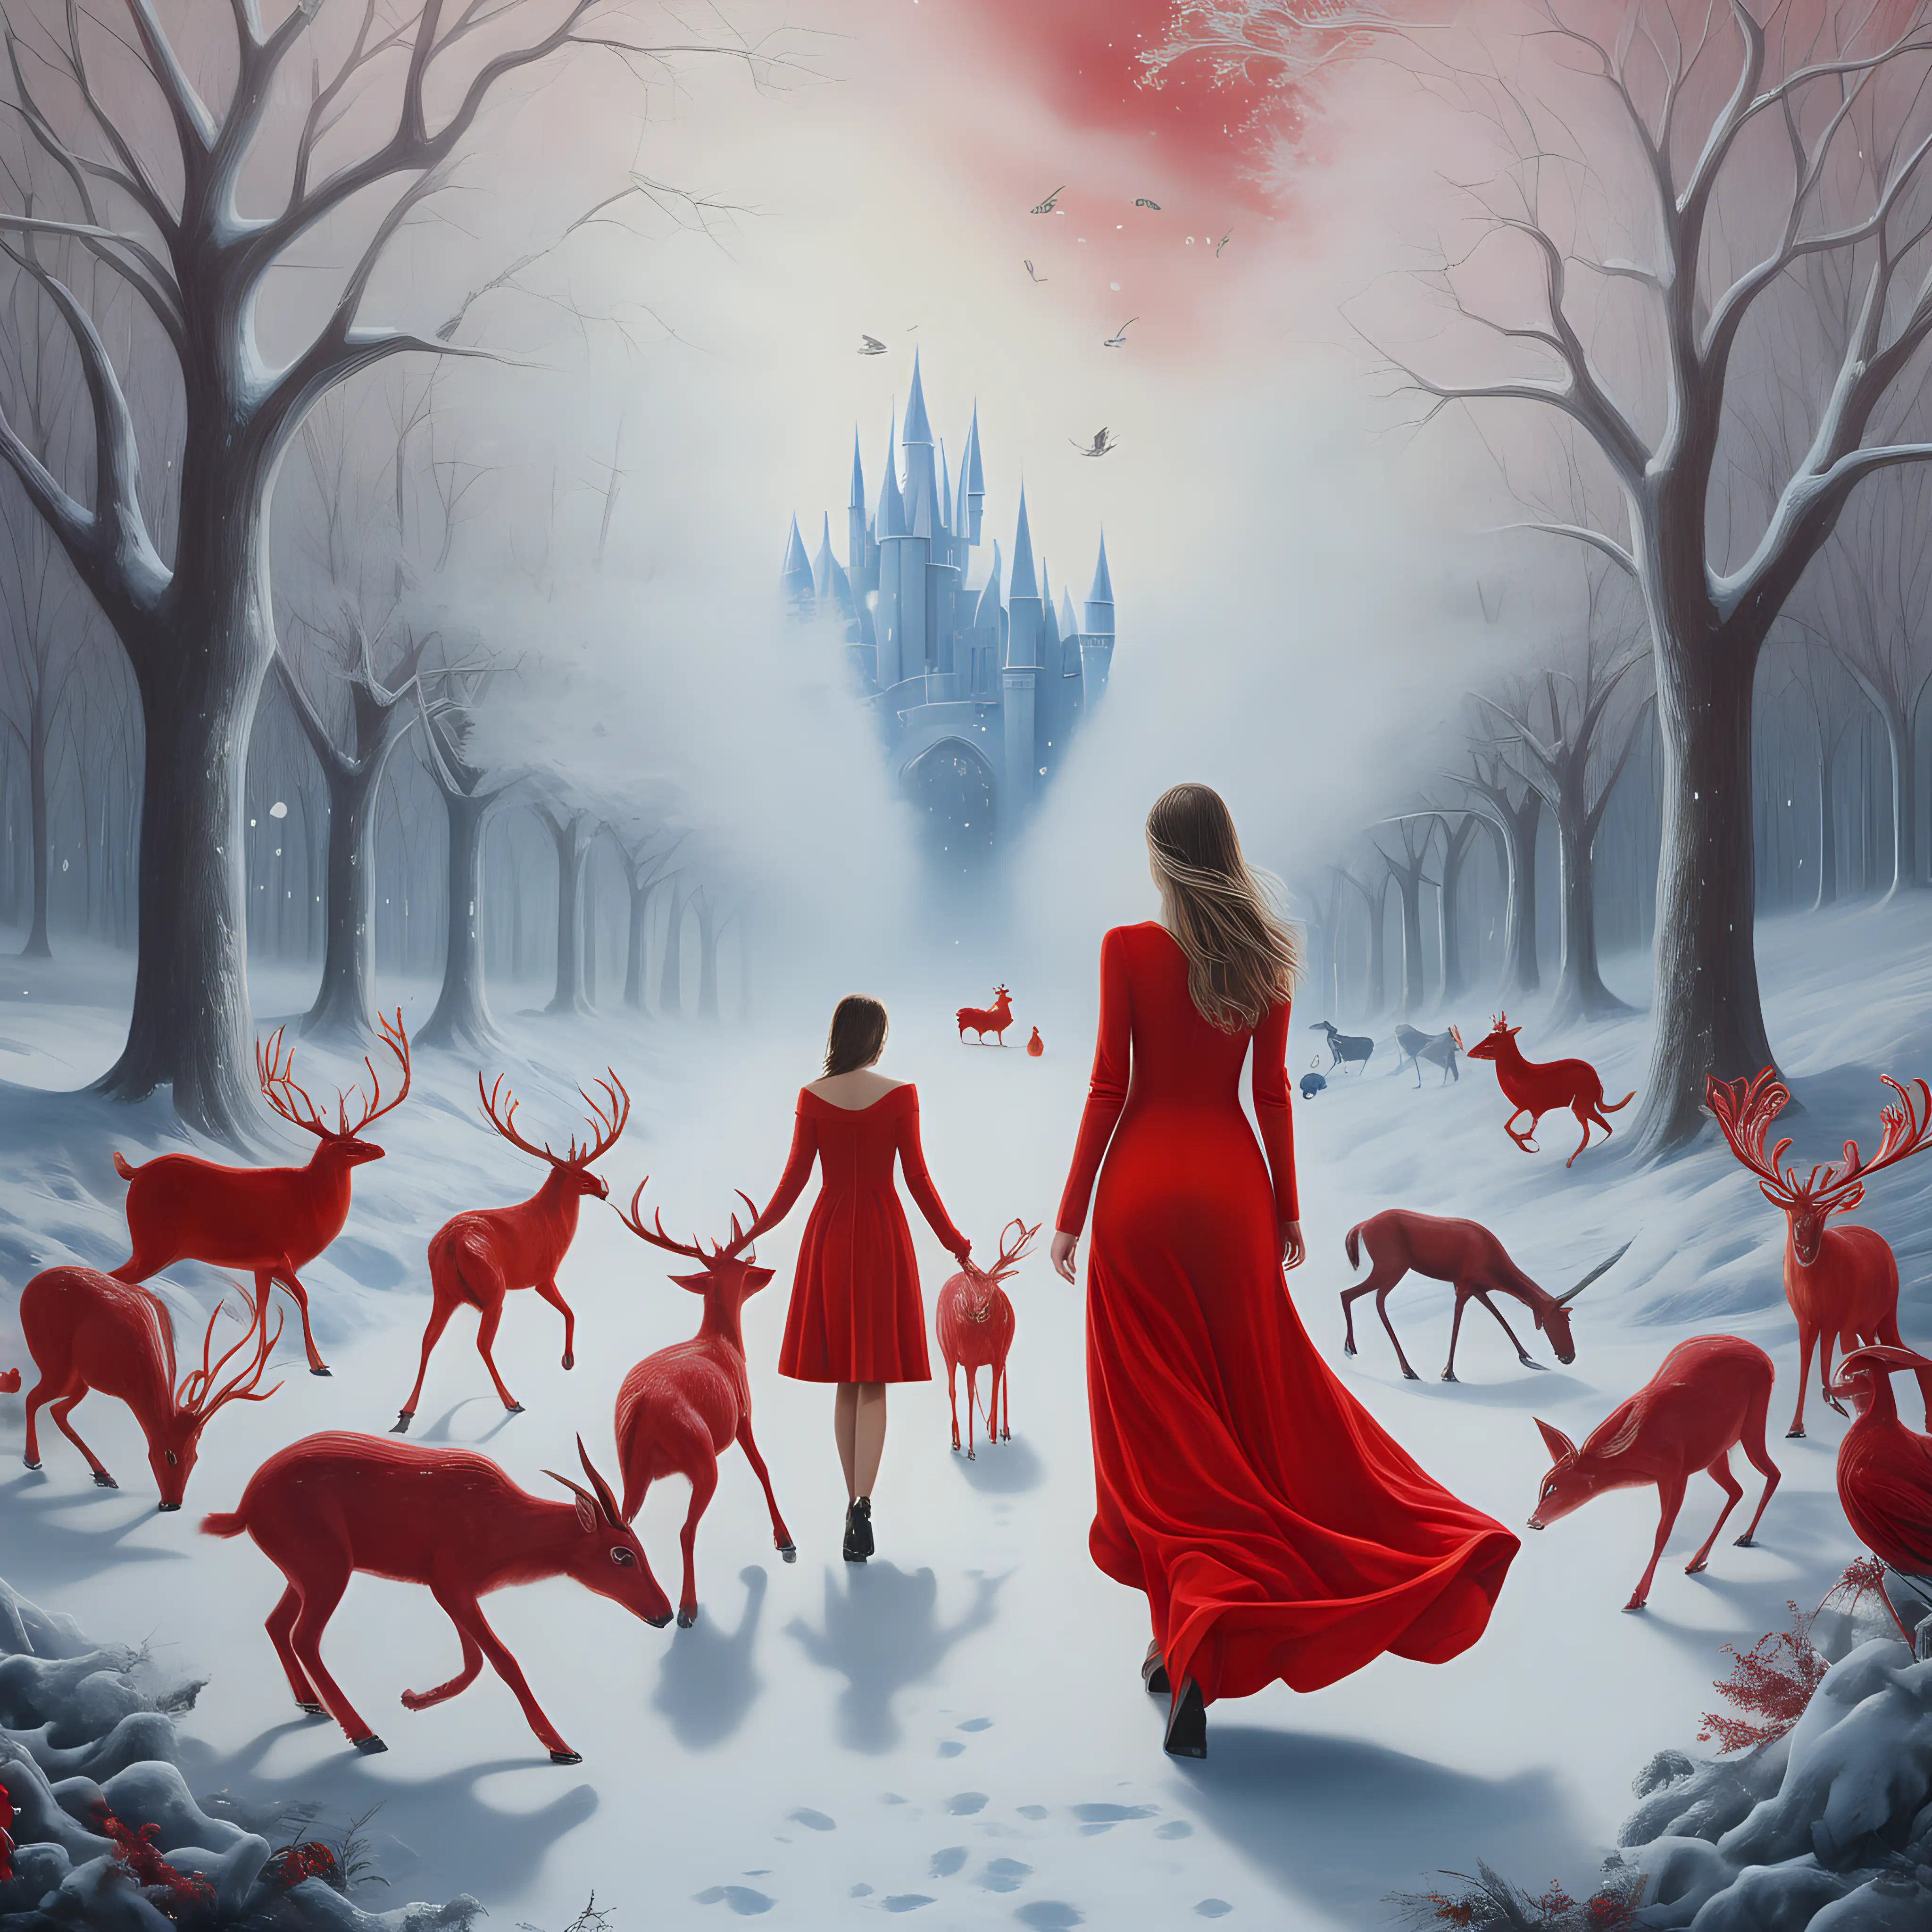 30x40 cm woman in red dress walking through winter wonderland with with magical creatures watching her closely
